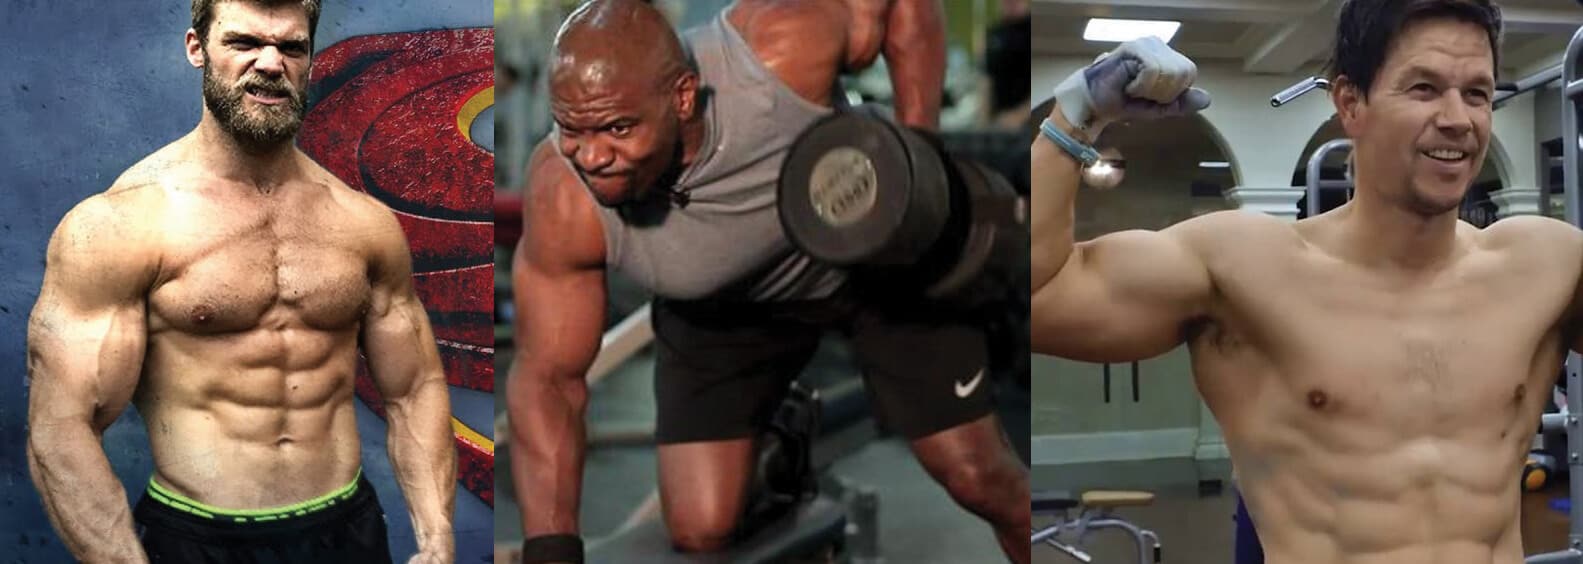 10 Best Celebrity Workouts to Get Ripped for the Big Role